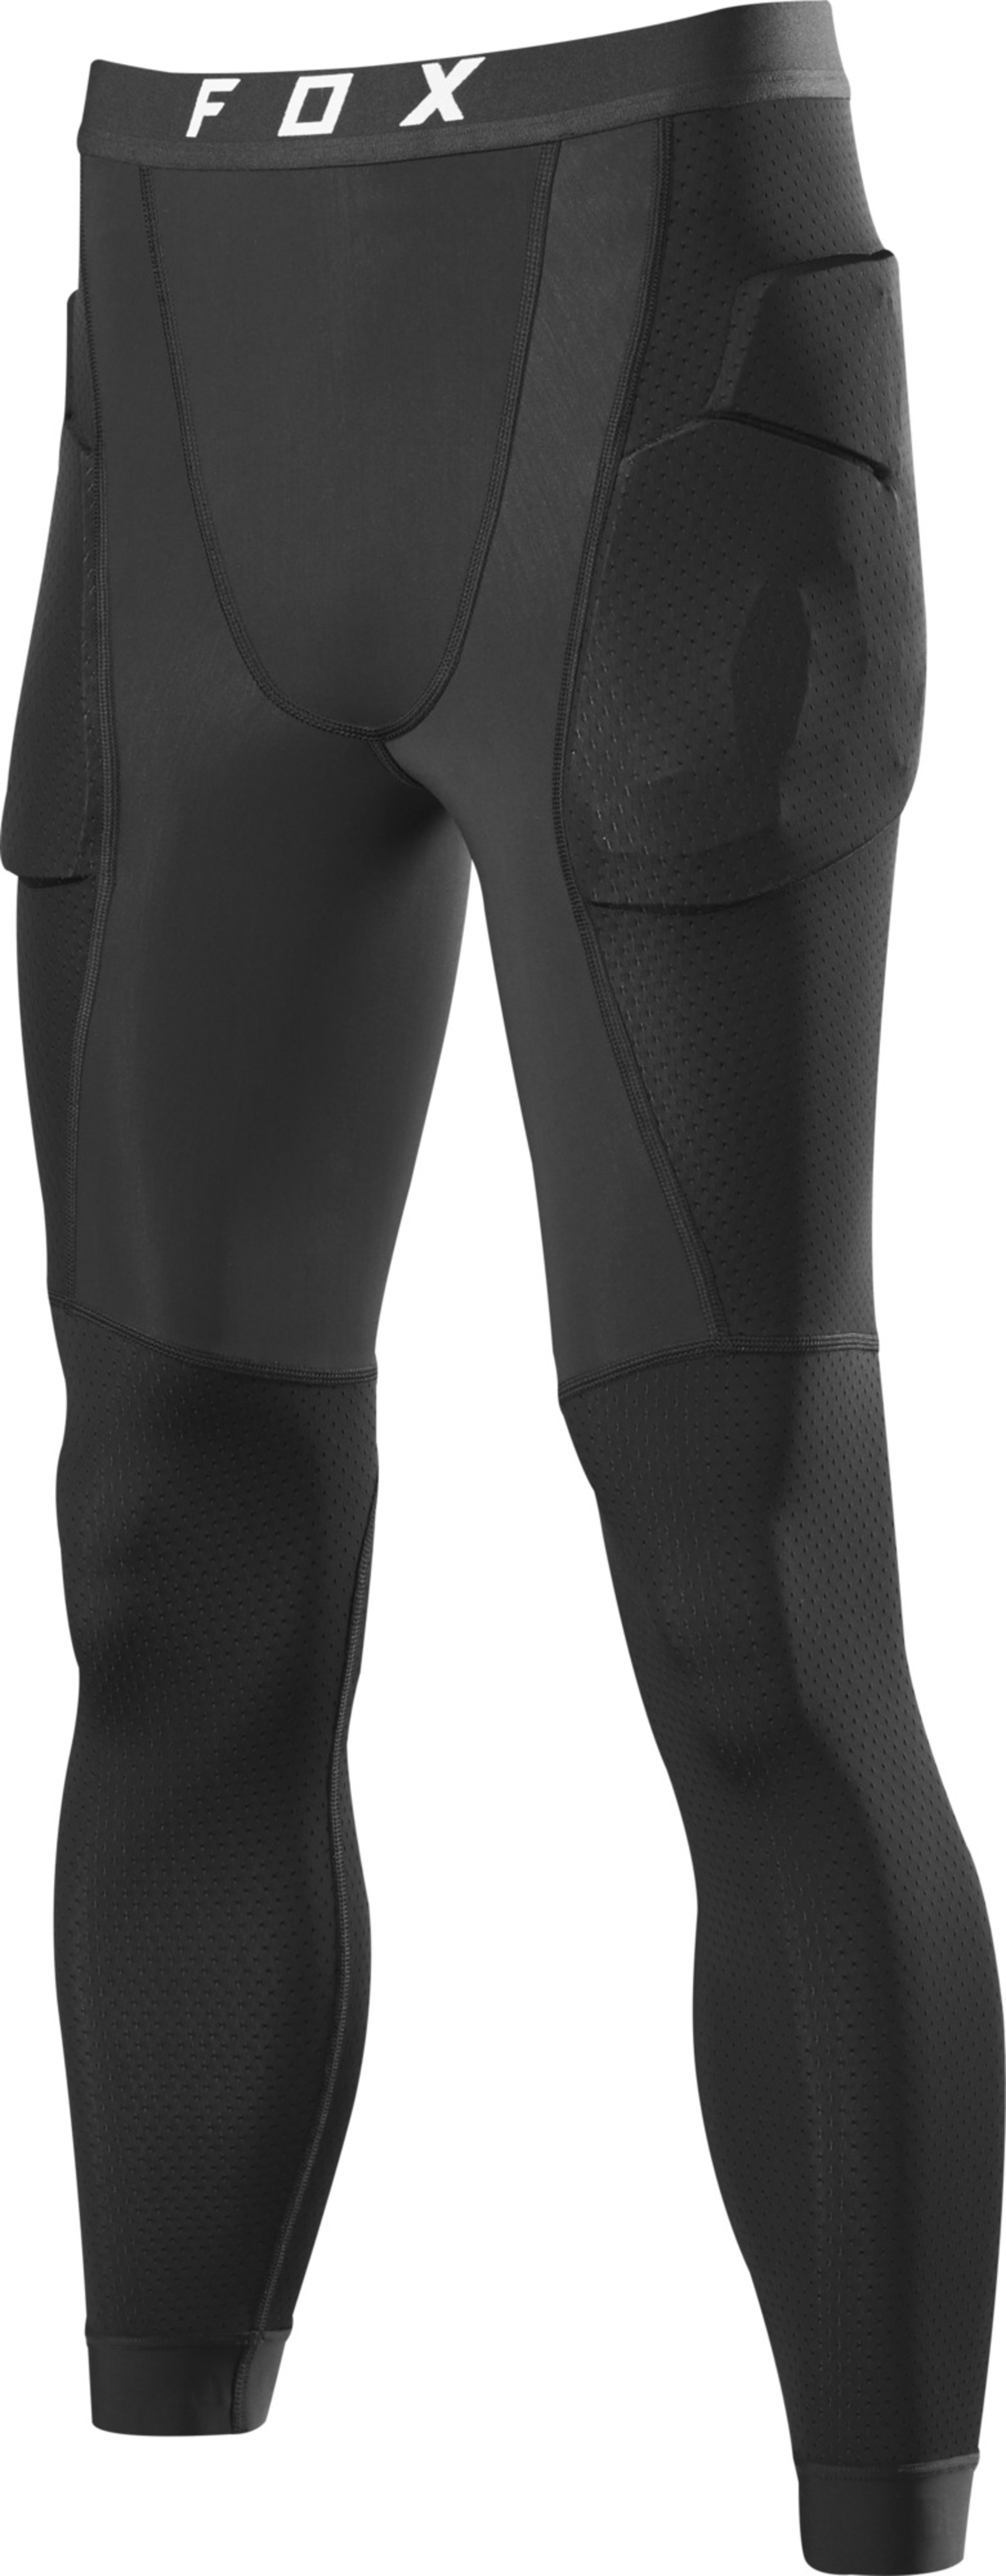 fox racing under protection protections for men baseframe pro pant